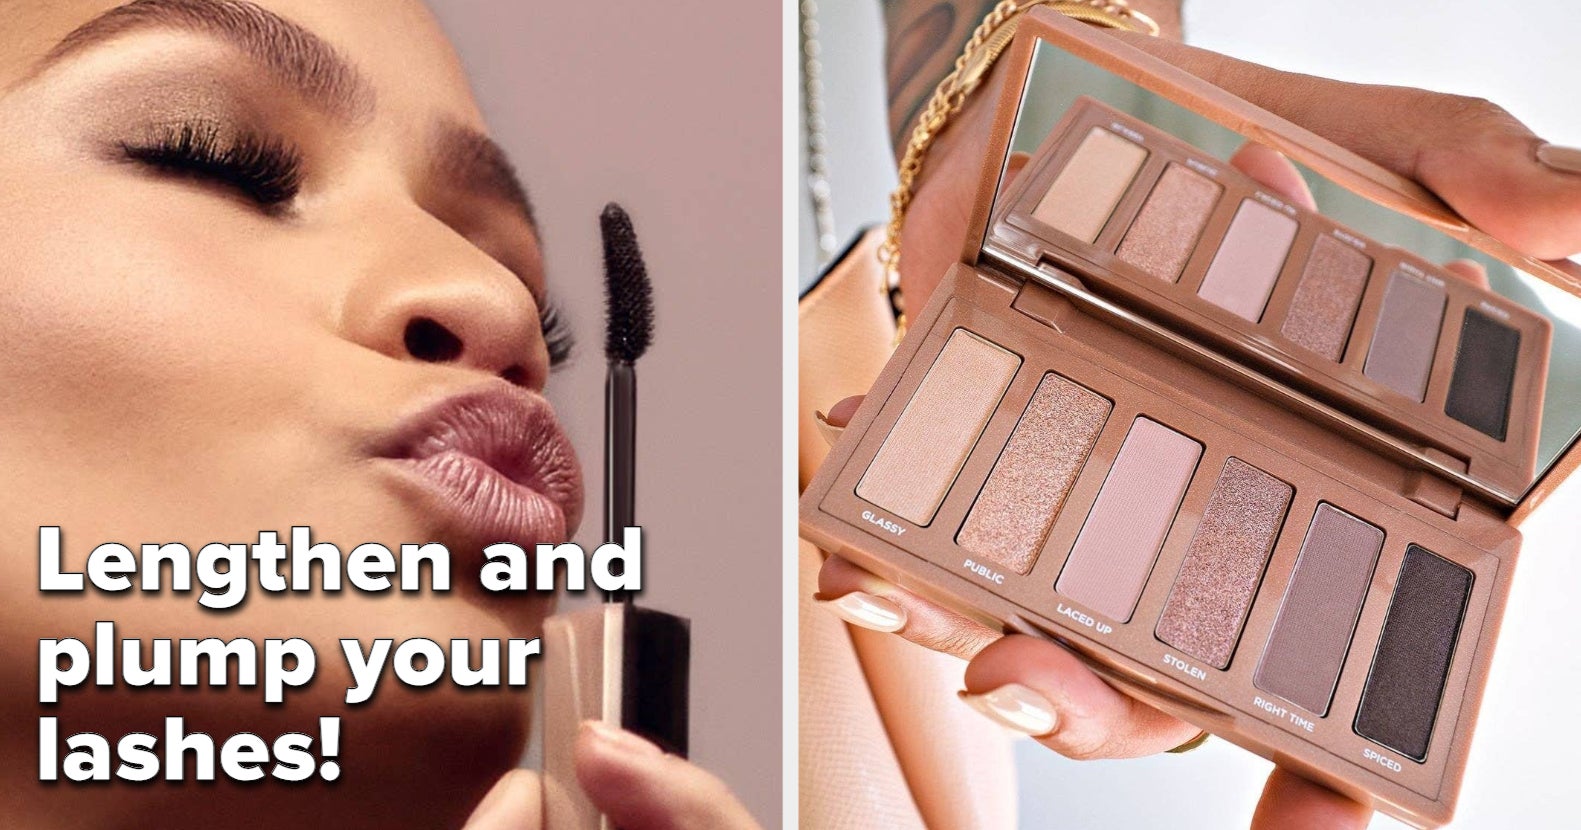 TikTok viral beauty products that are actually worth the hype